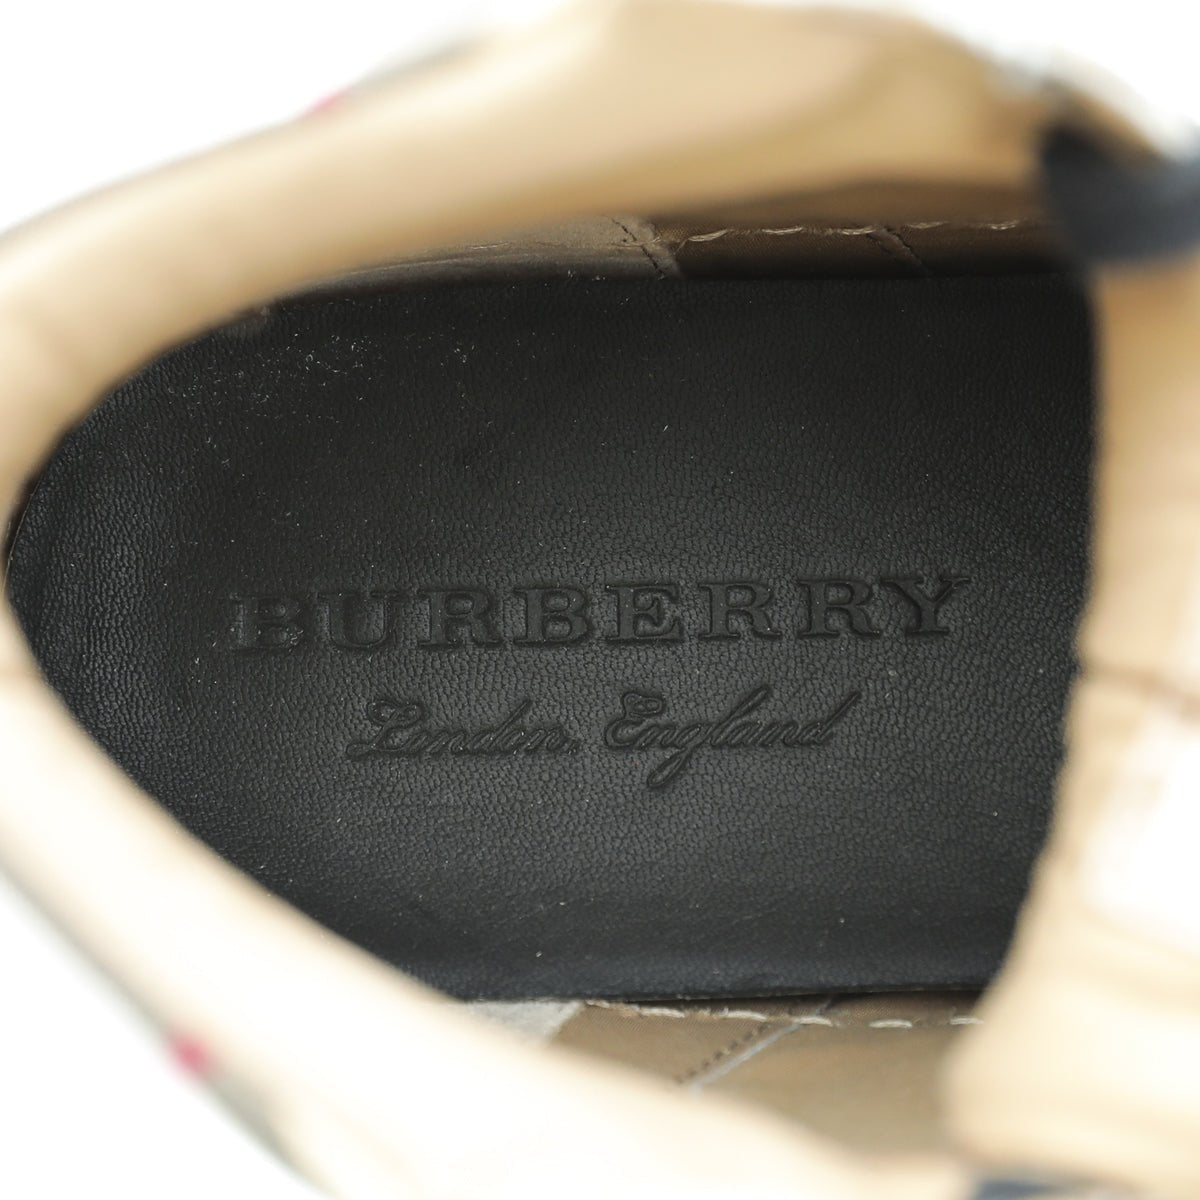 Burberry - Burberry Beige Vintage Check High Top Sneaker 39 | The Closet